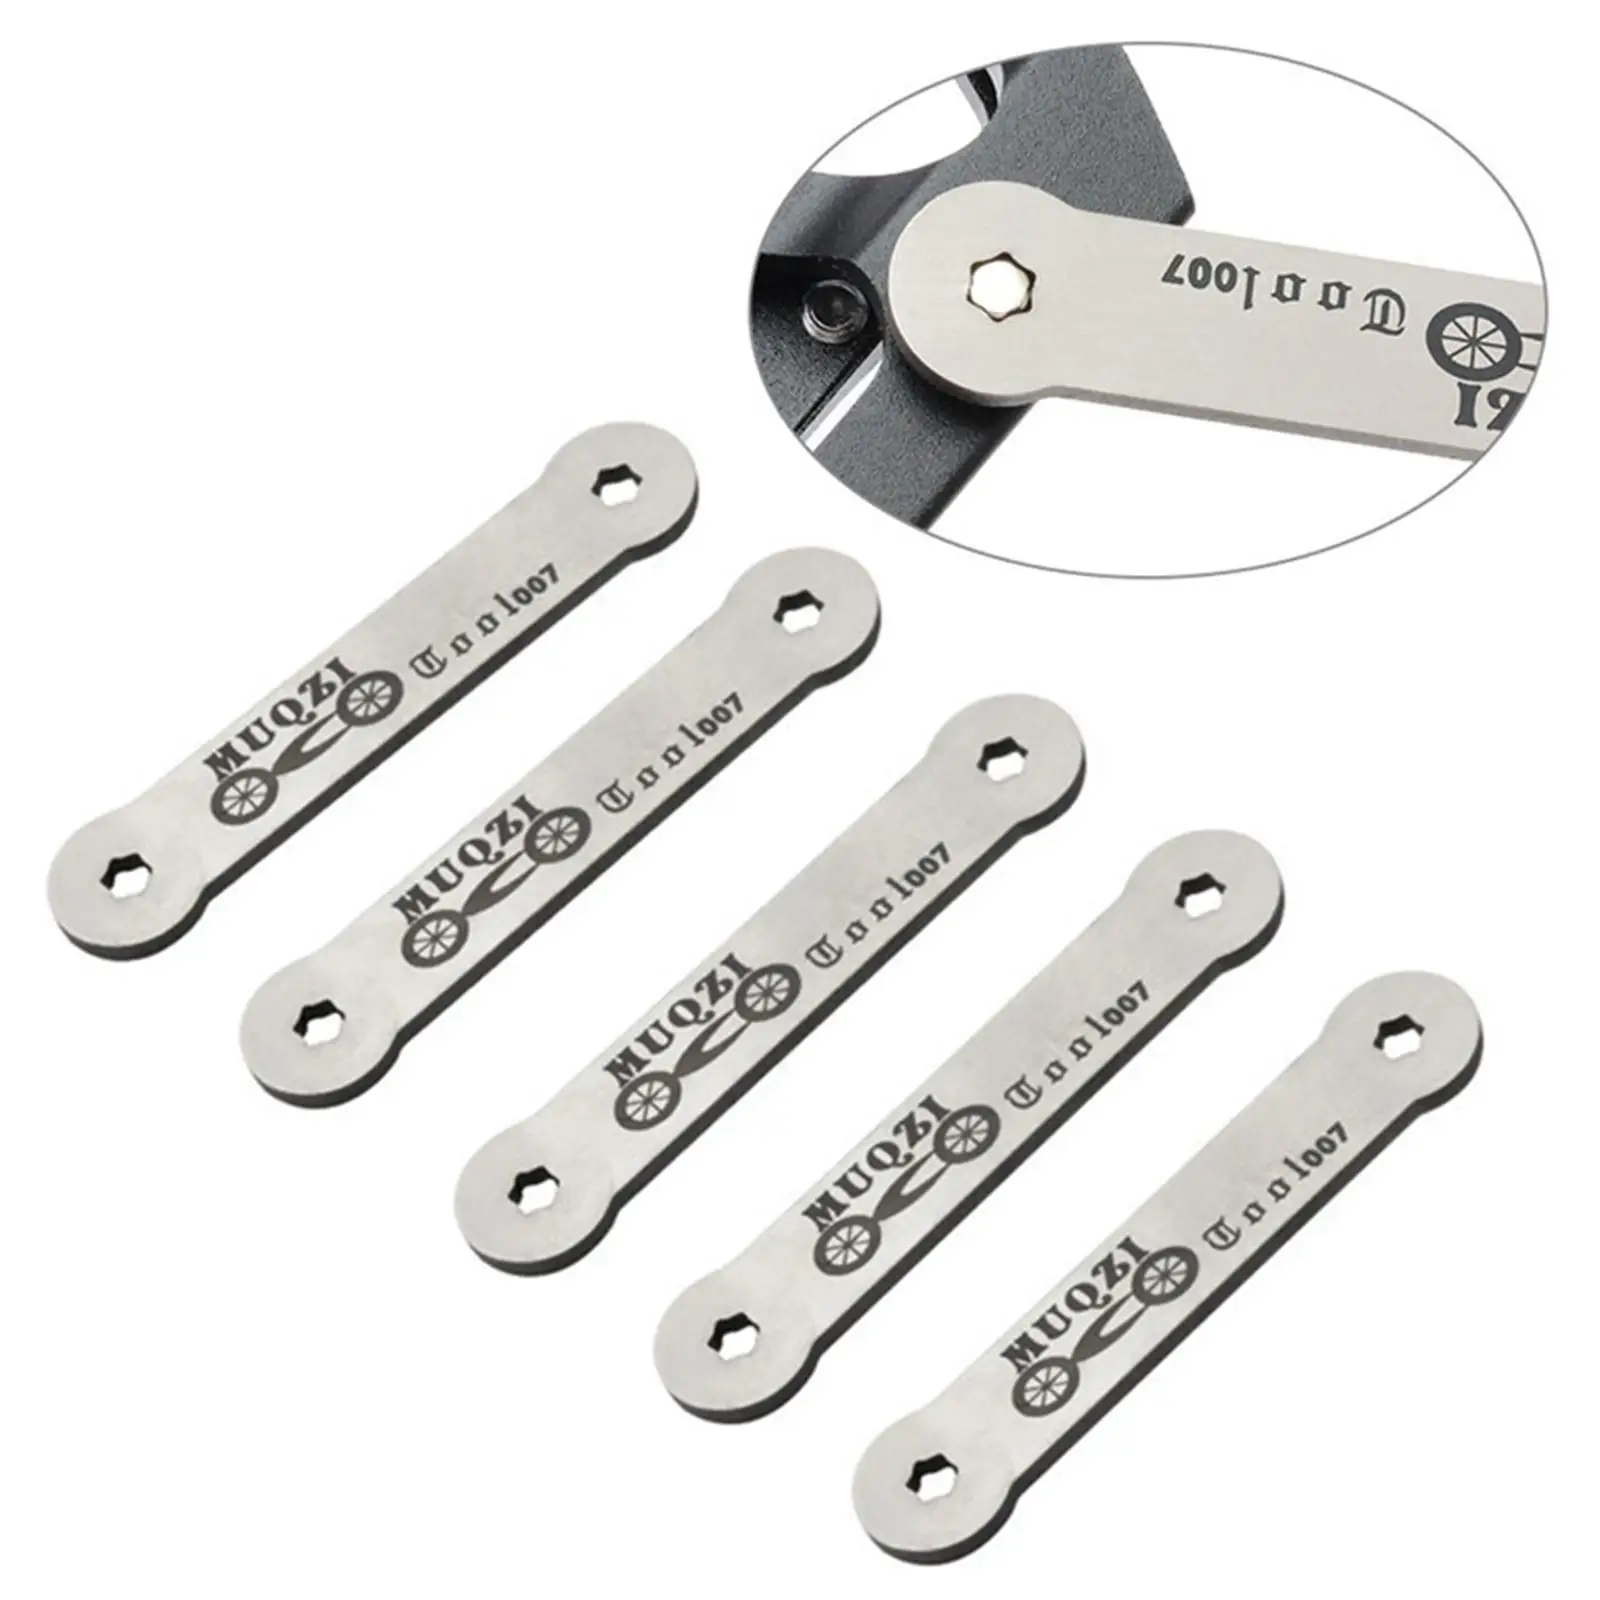 5Pcs Bike Pedal Screw Wrench Anti-Rust Disassembly High-Quality for Repair